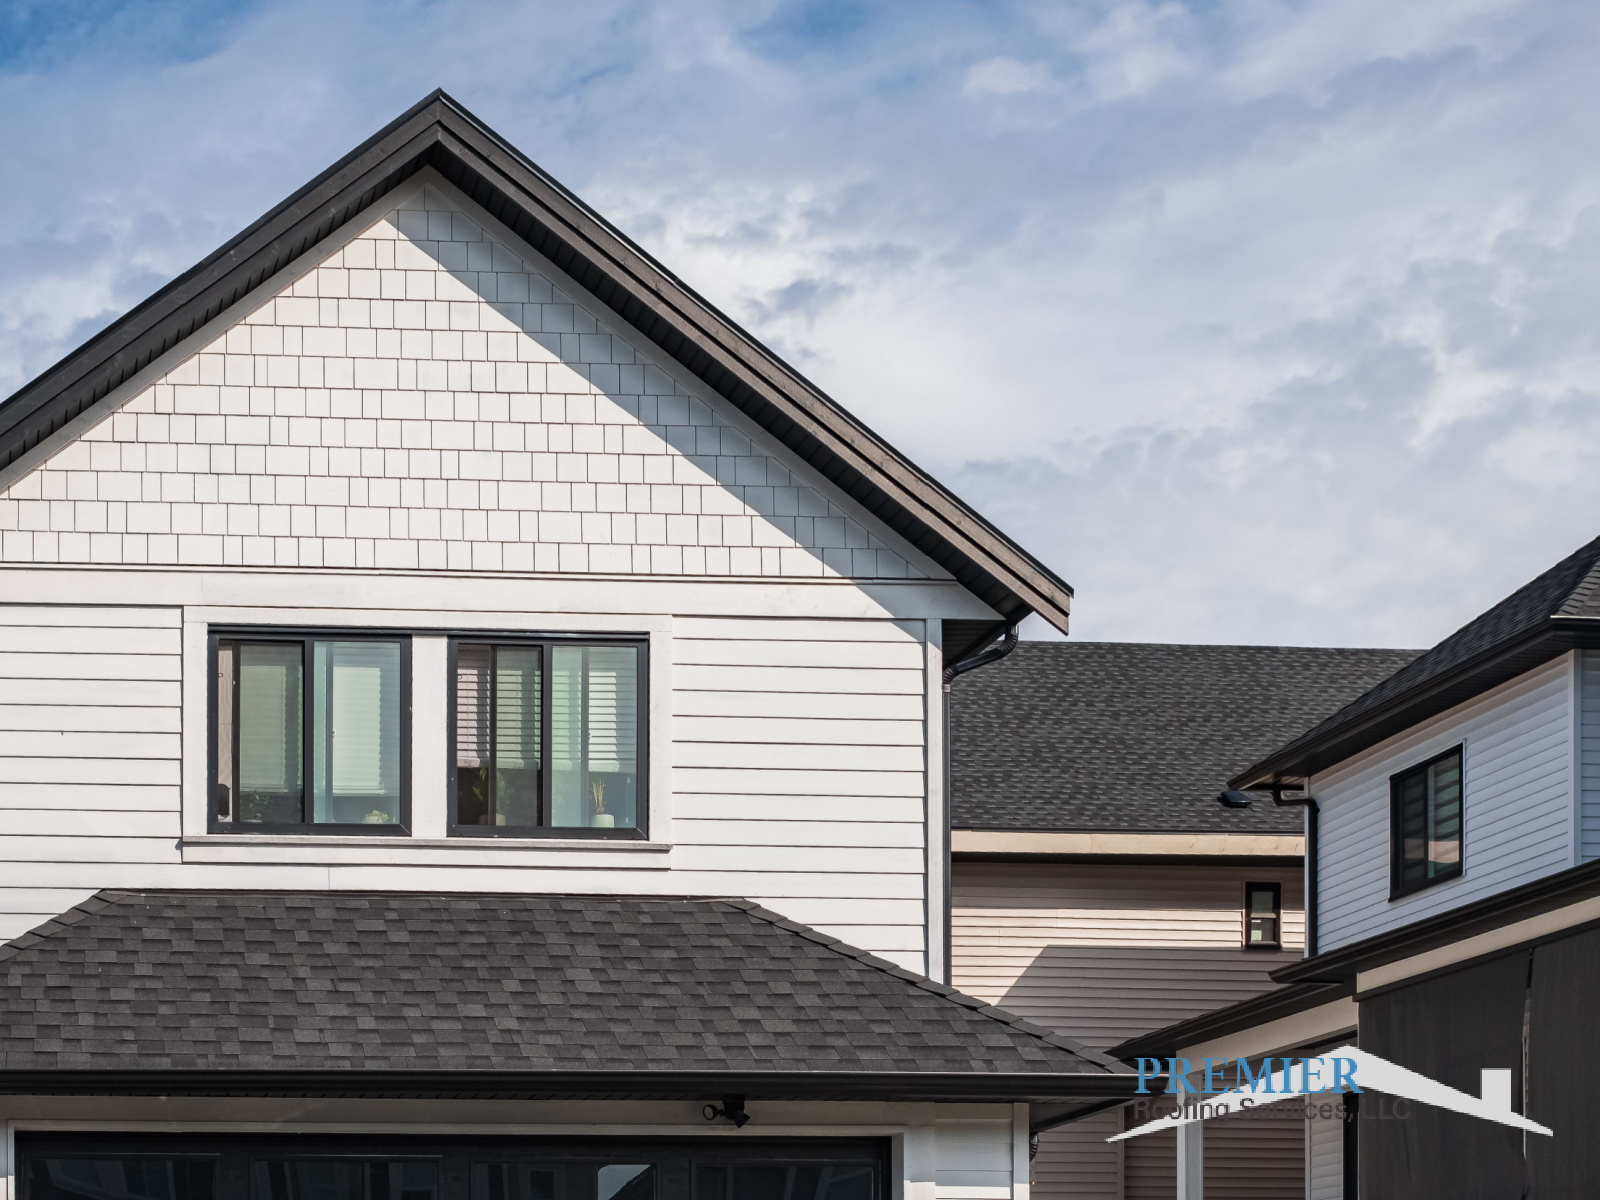 Are You Looking for Asphalt Shingle Replacement in Granite Falls?